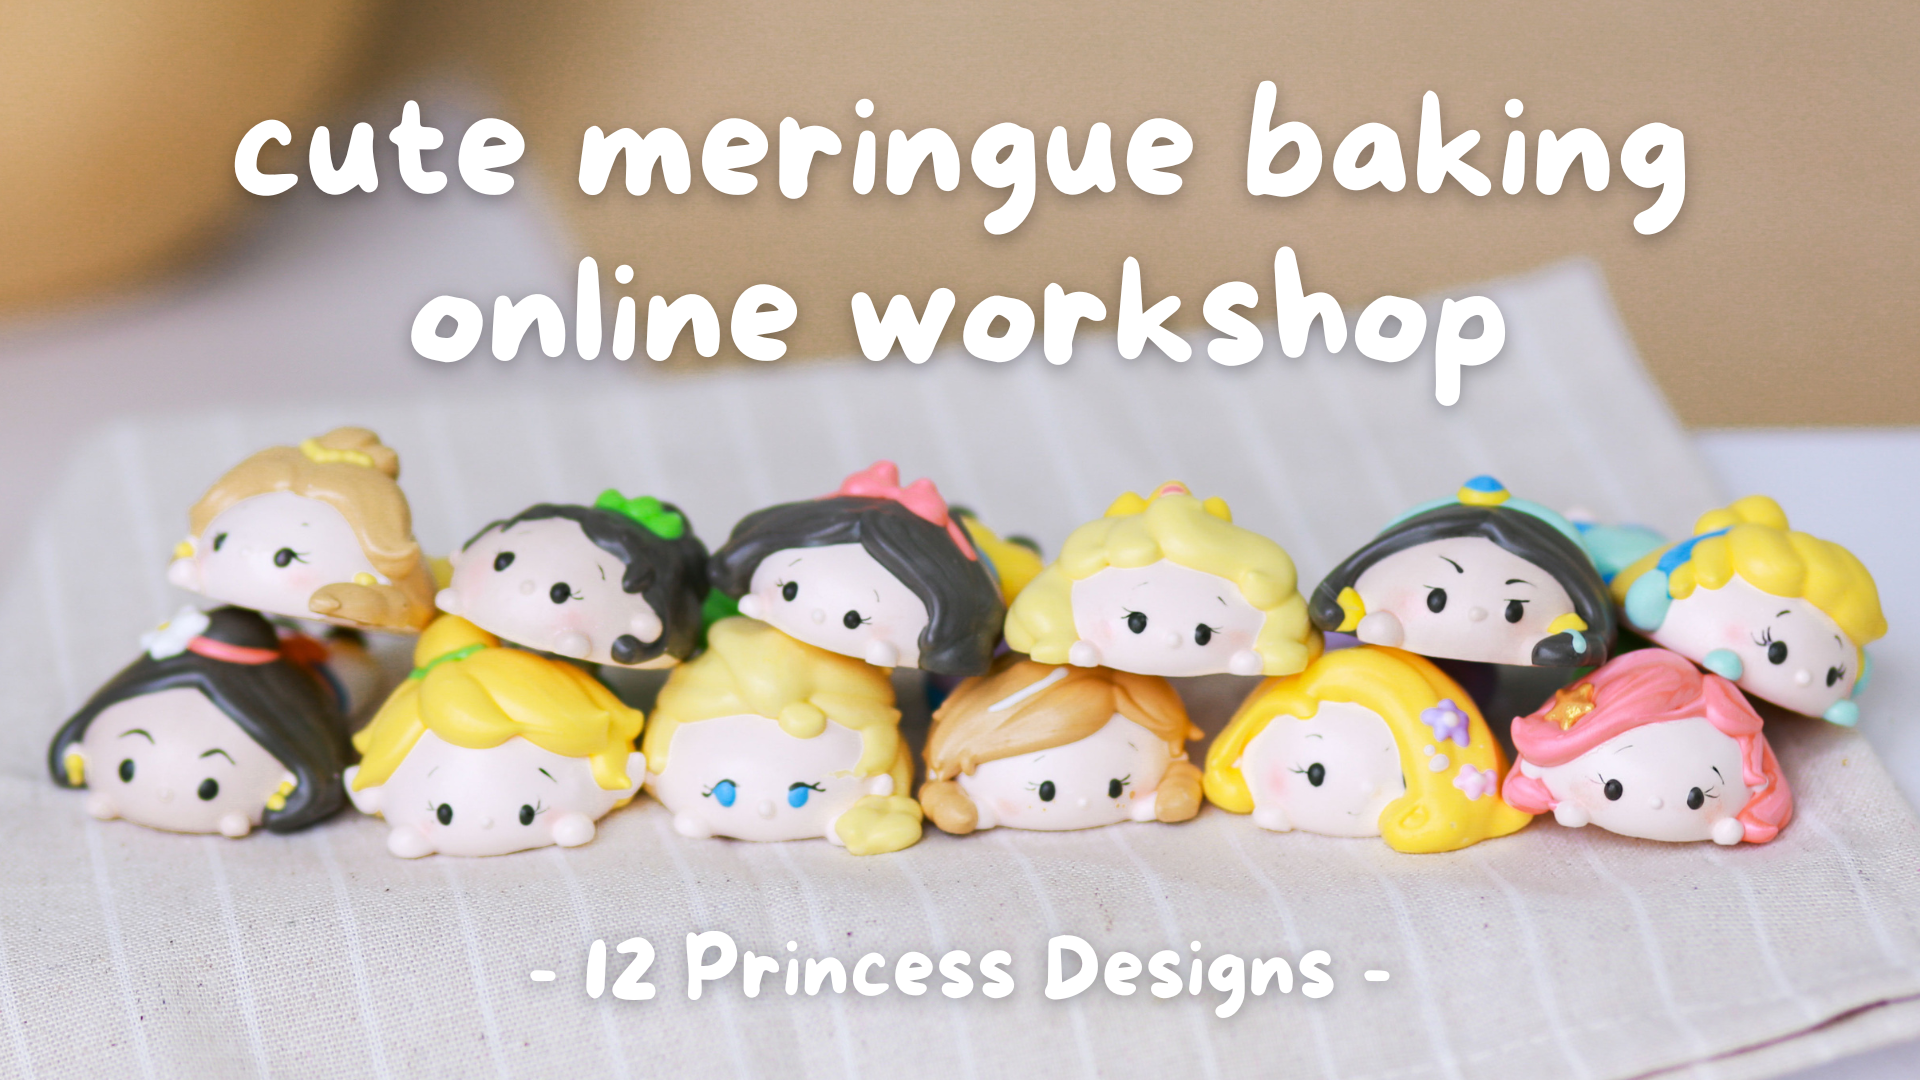 Learn to Make Your Own Disney Princess Meringue Cookies with Sugariffic